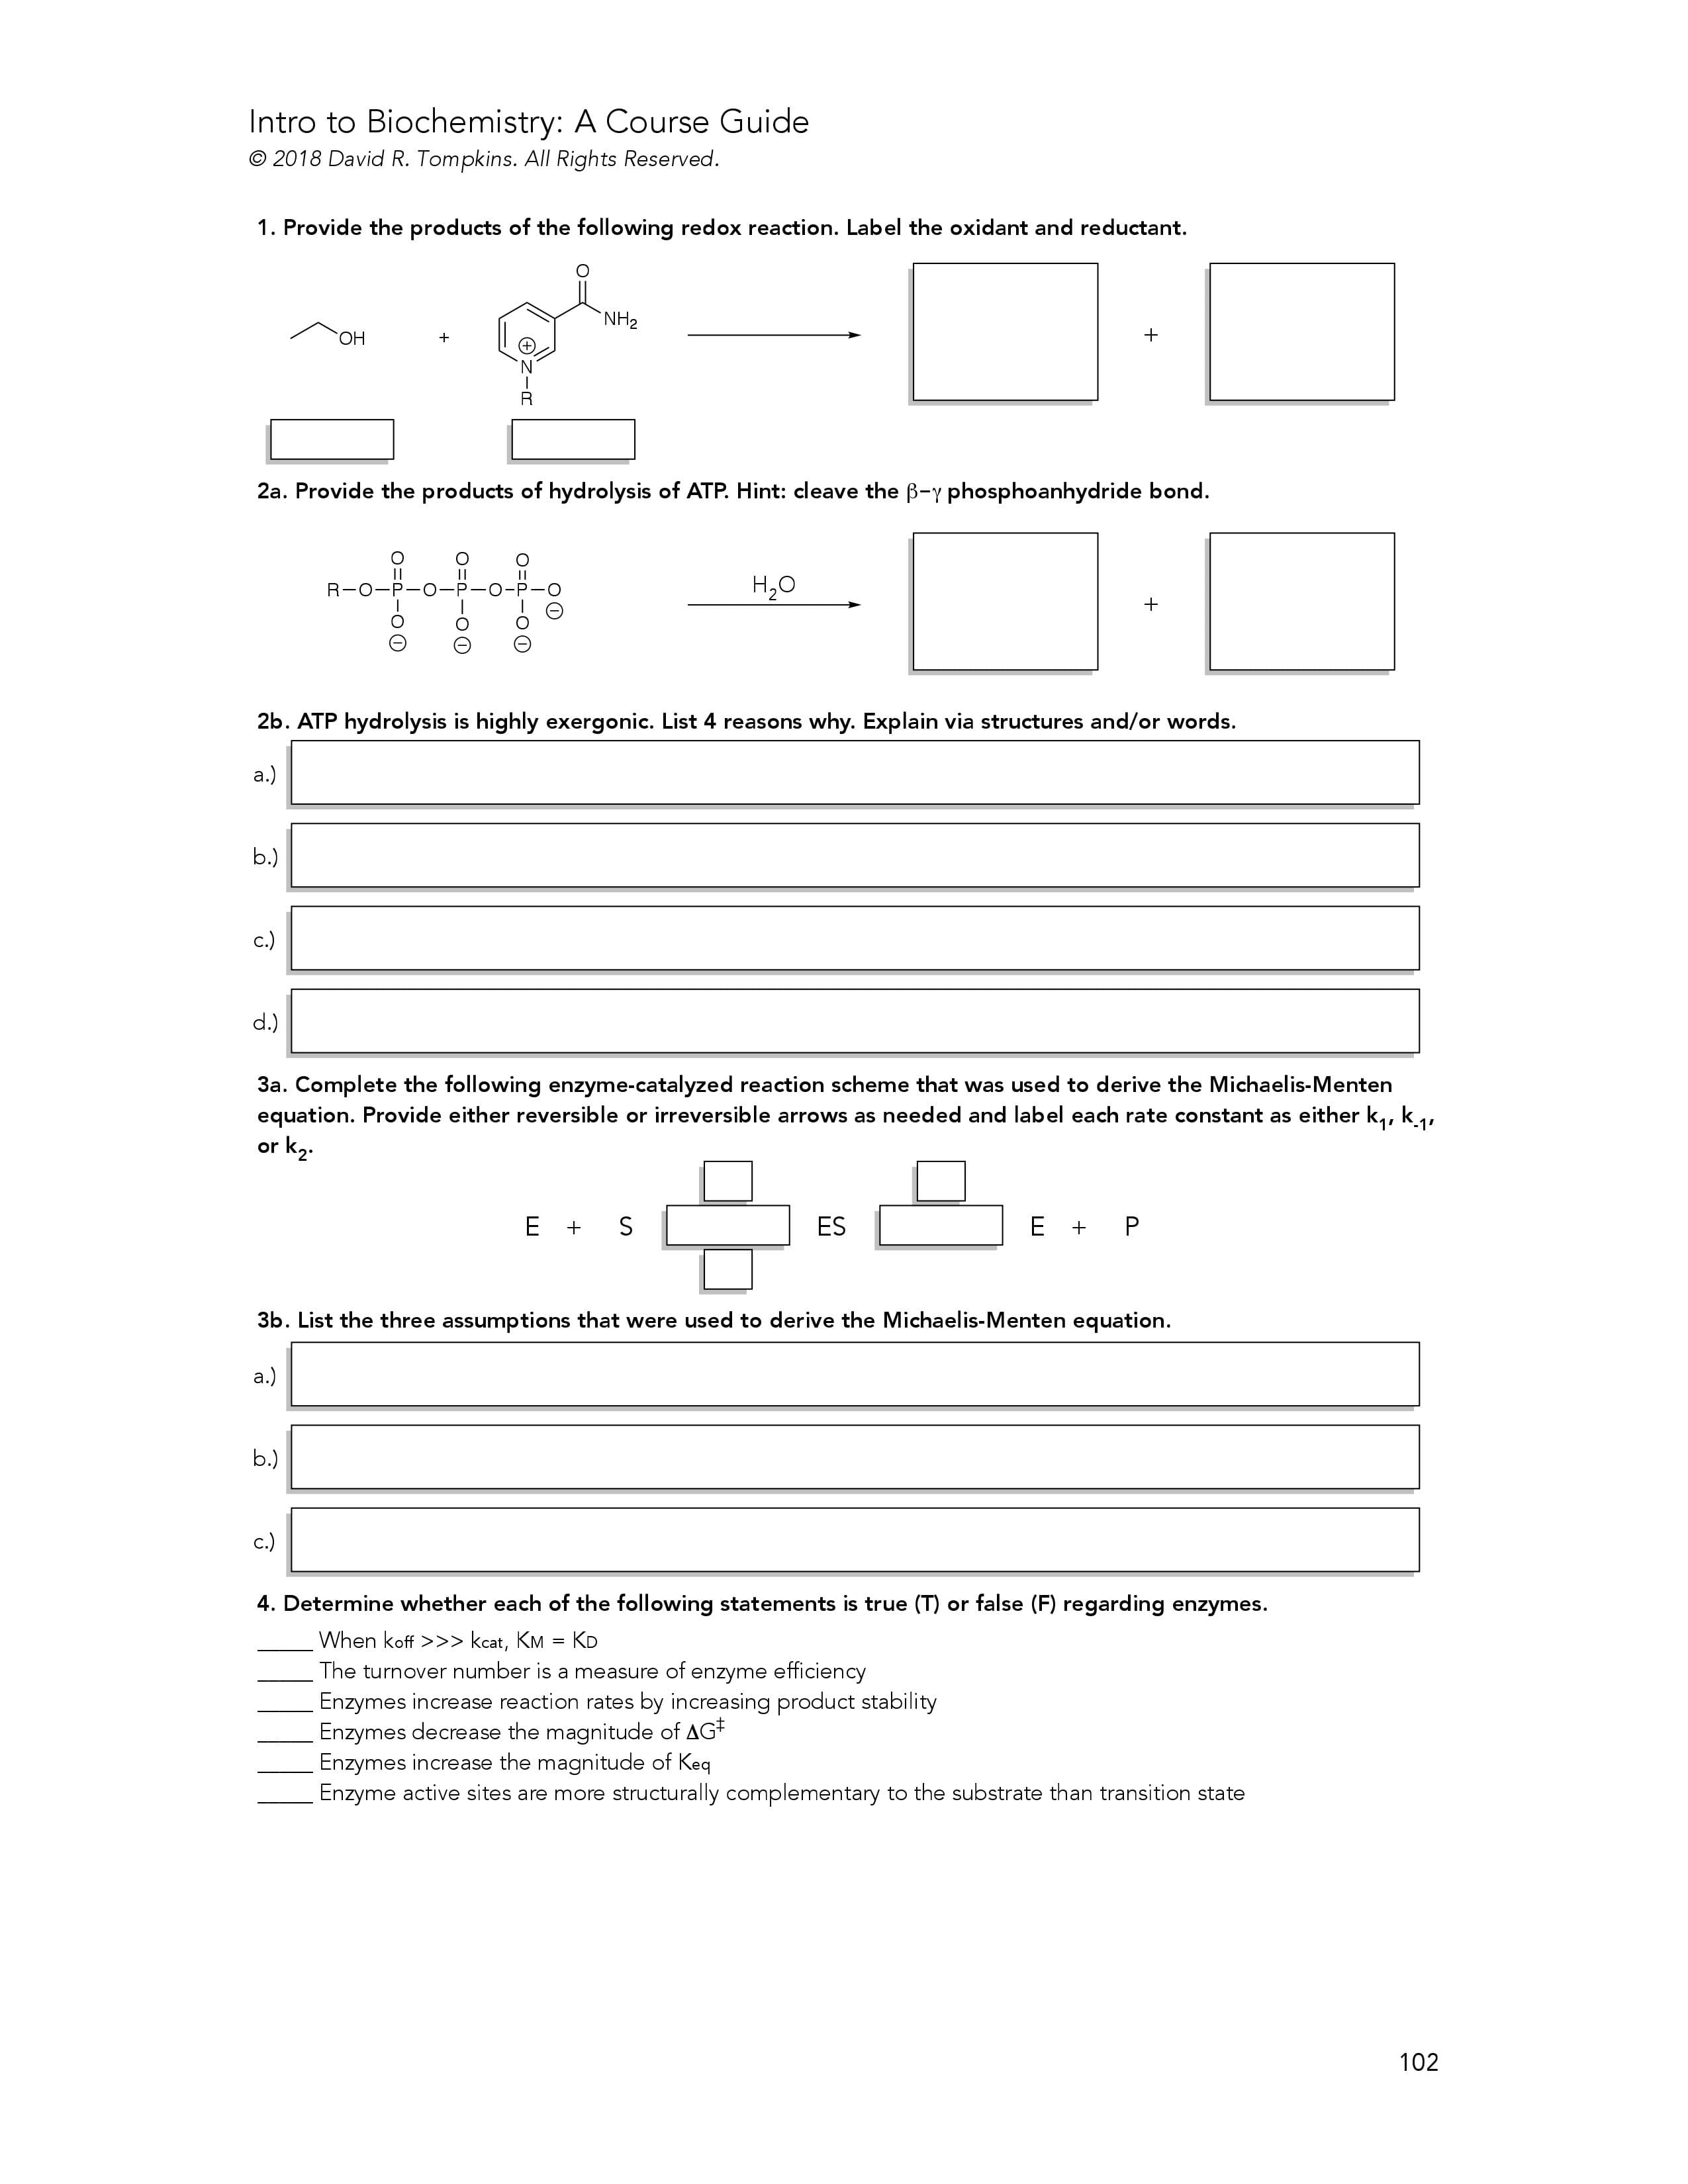 Introduction to Biochemistry Course Guide Example Page 1